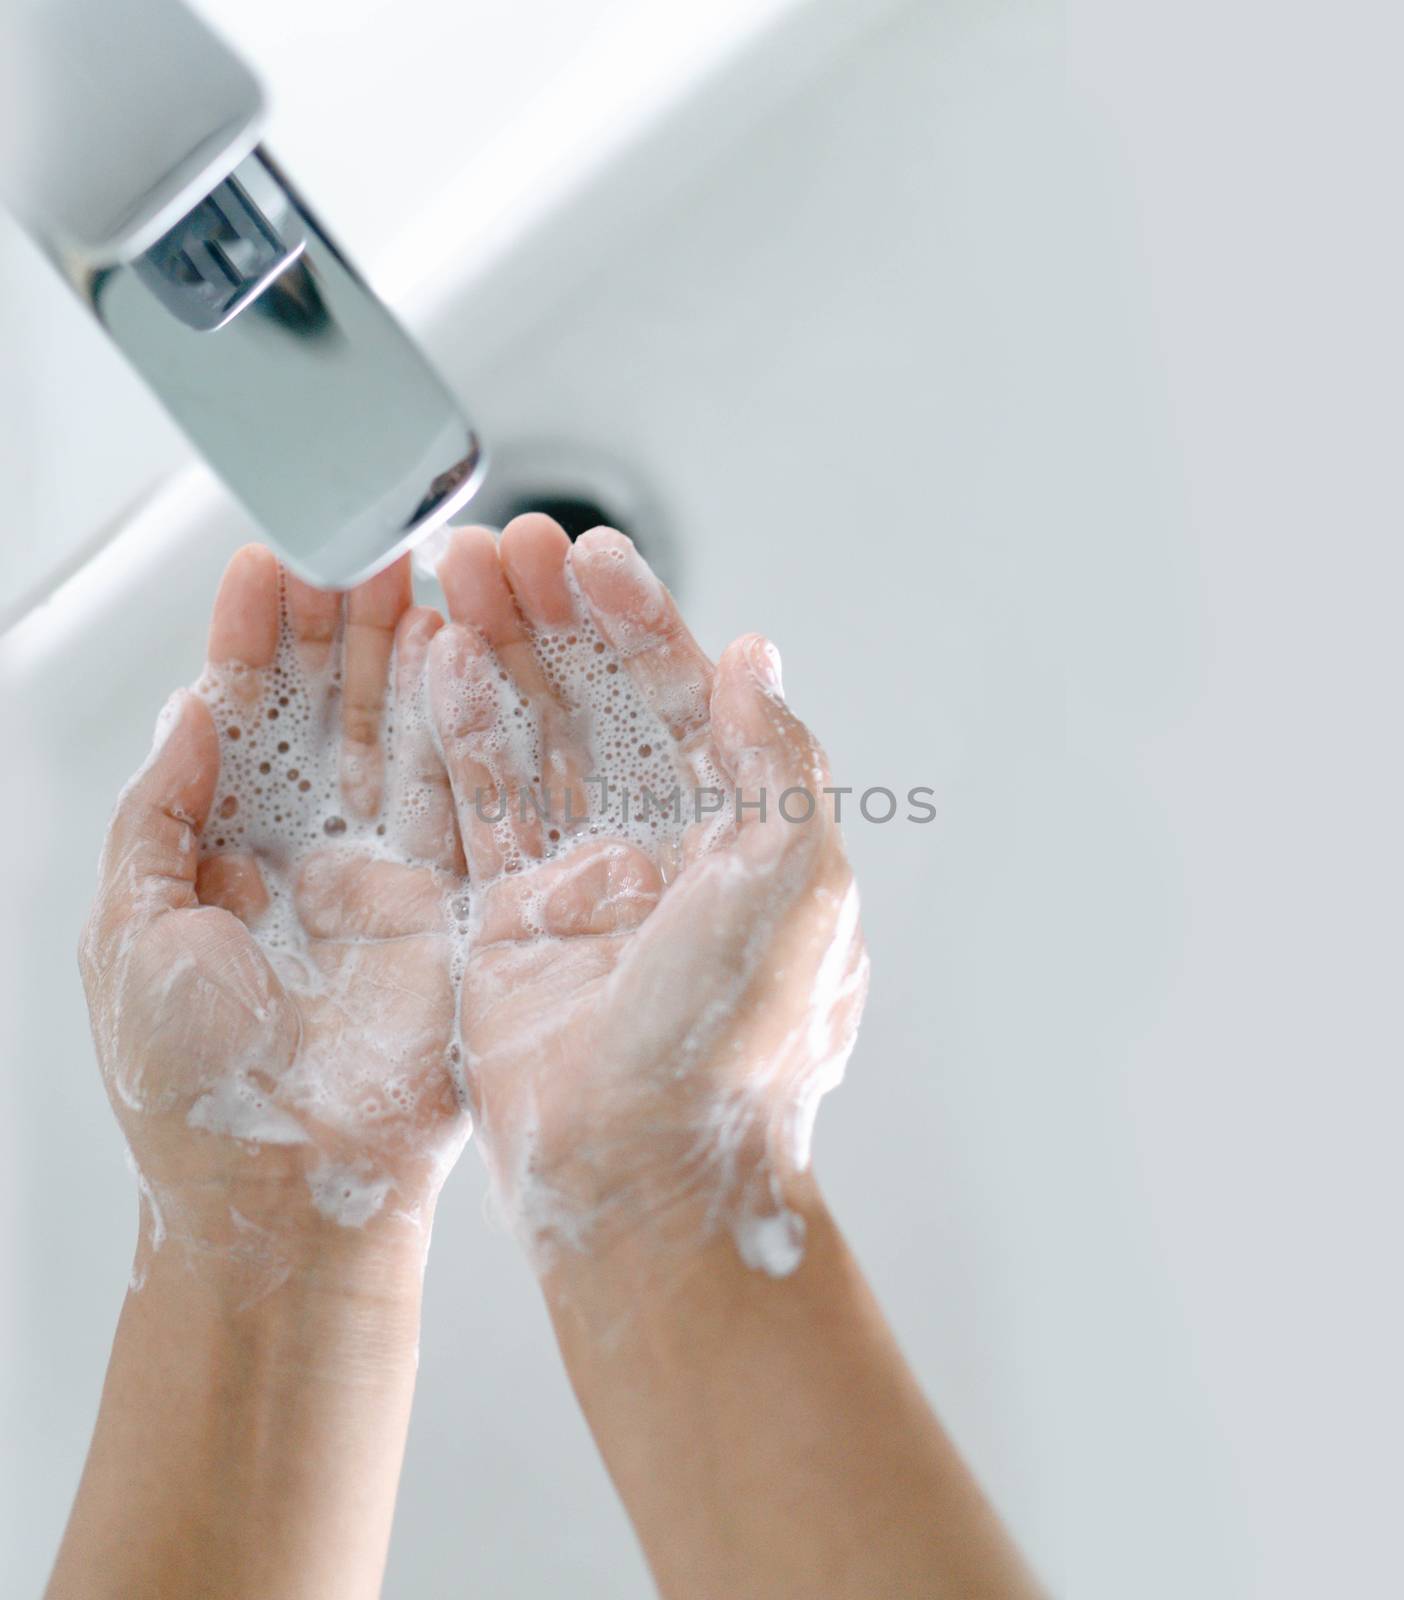 Closeup woman's hand washing with soap in bathroom, selective focus